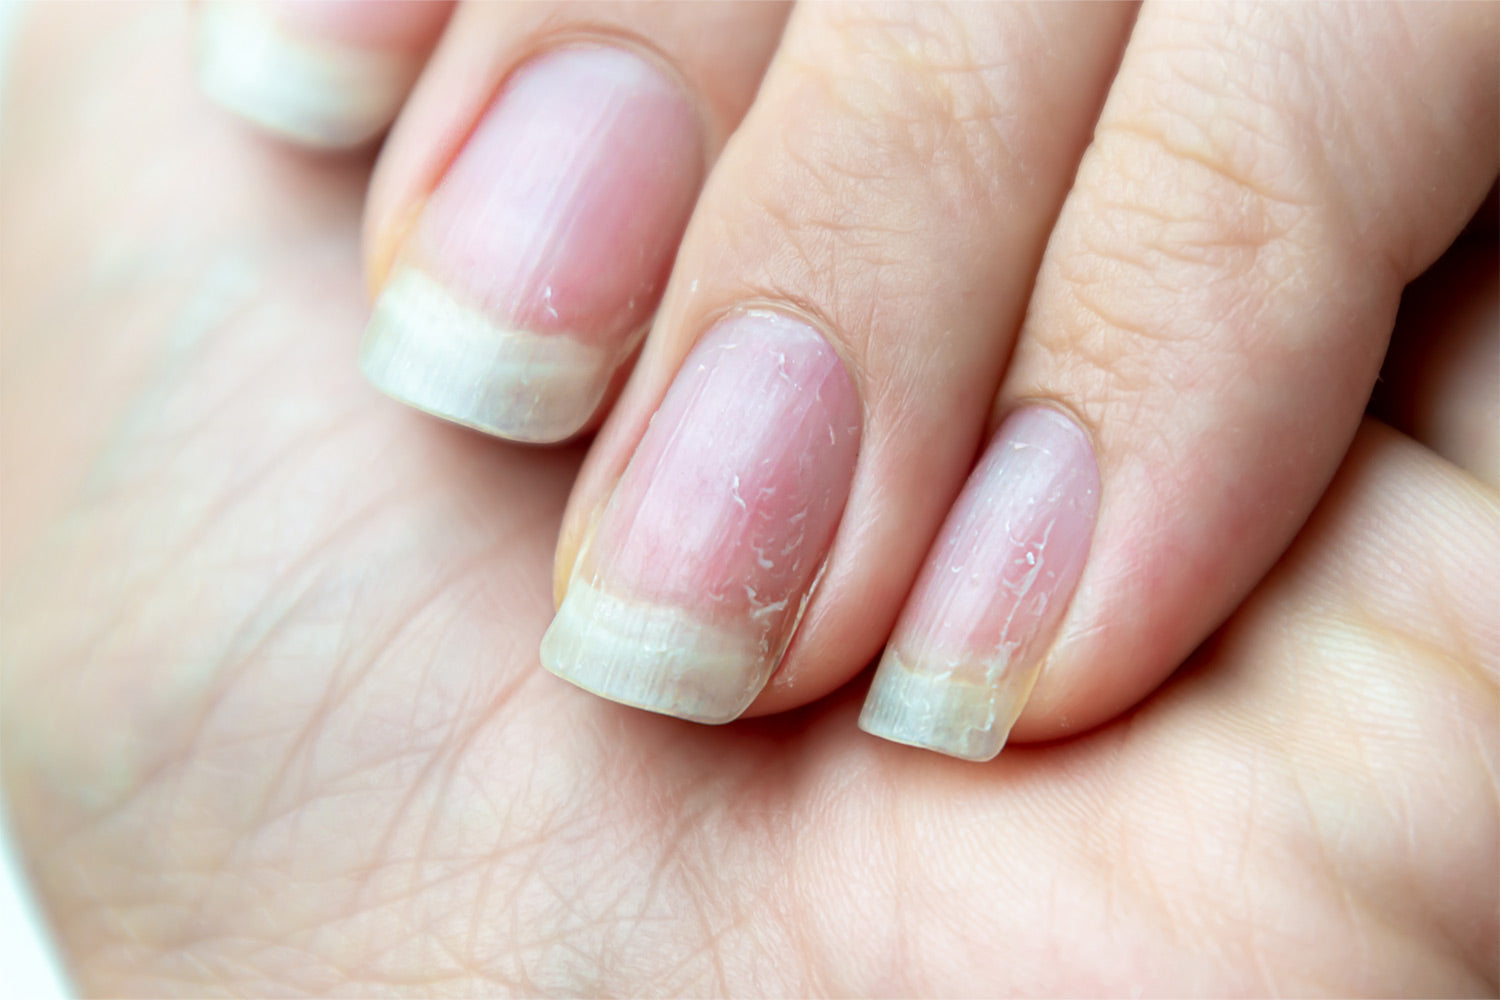 Home remedies for weak brittle nails | The Royale